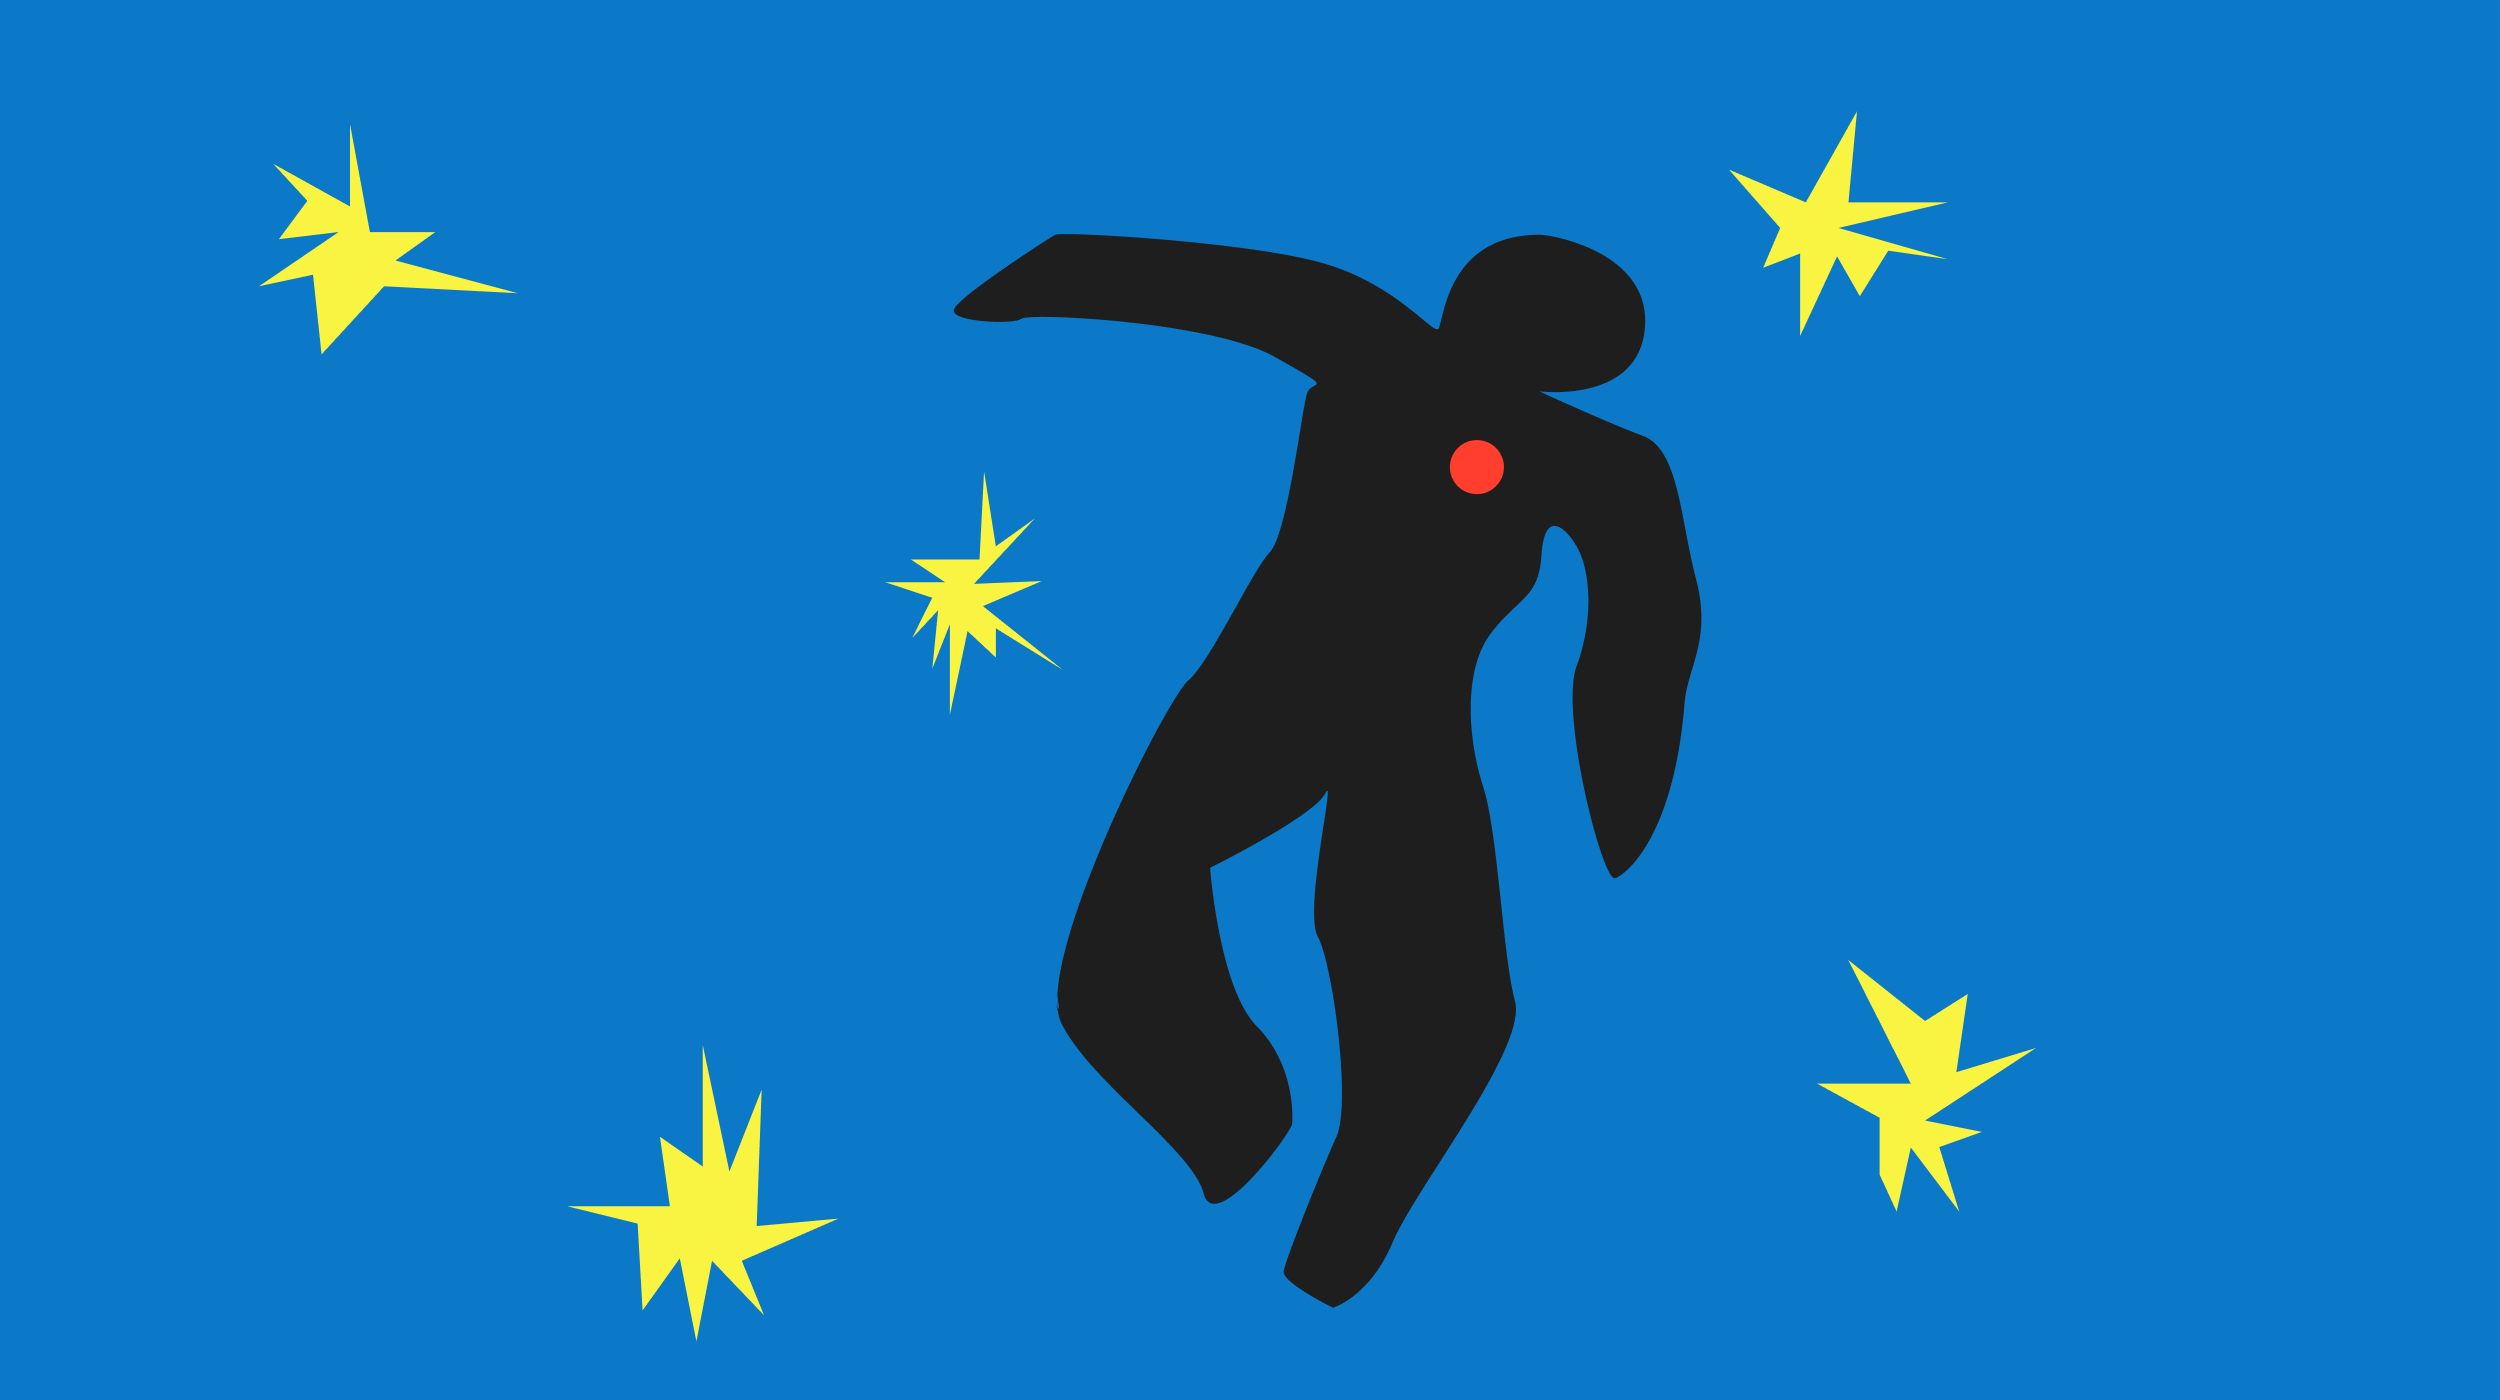 A silhouette of a man flying in the sky with stars.